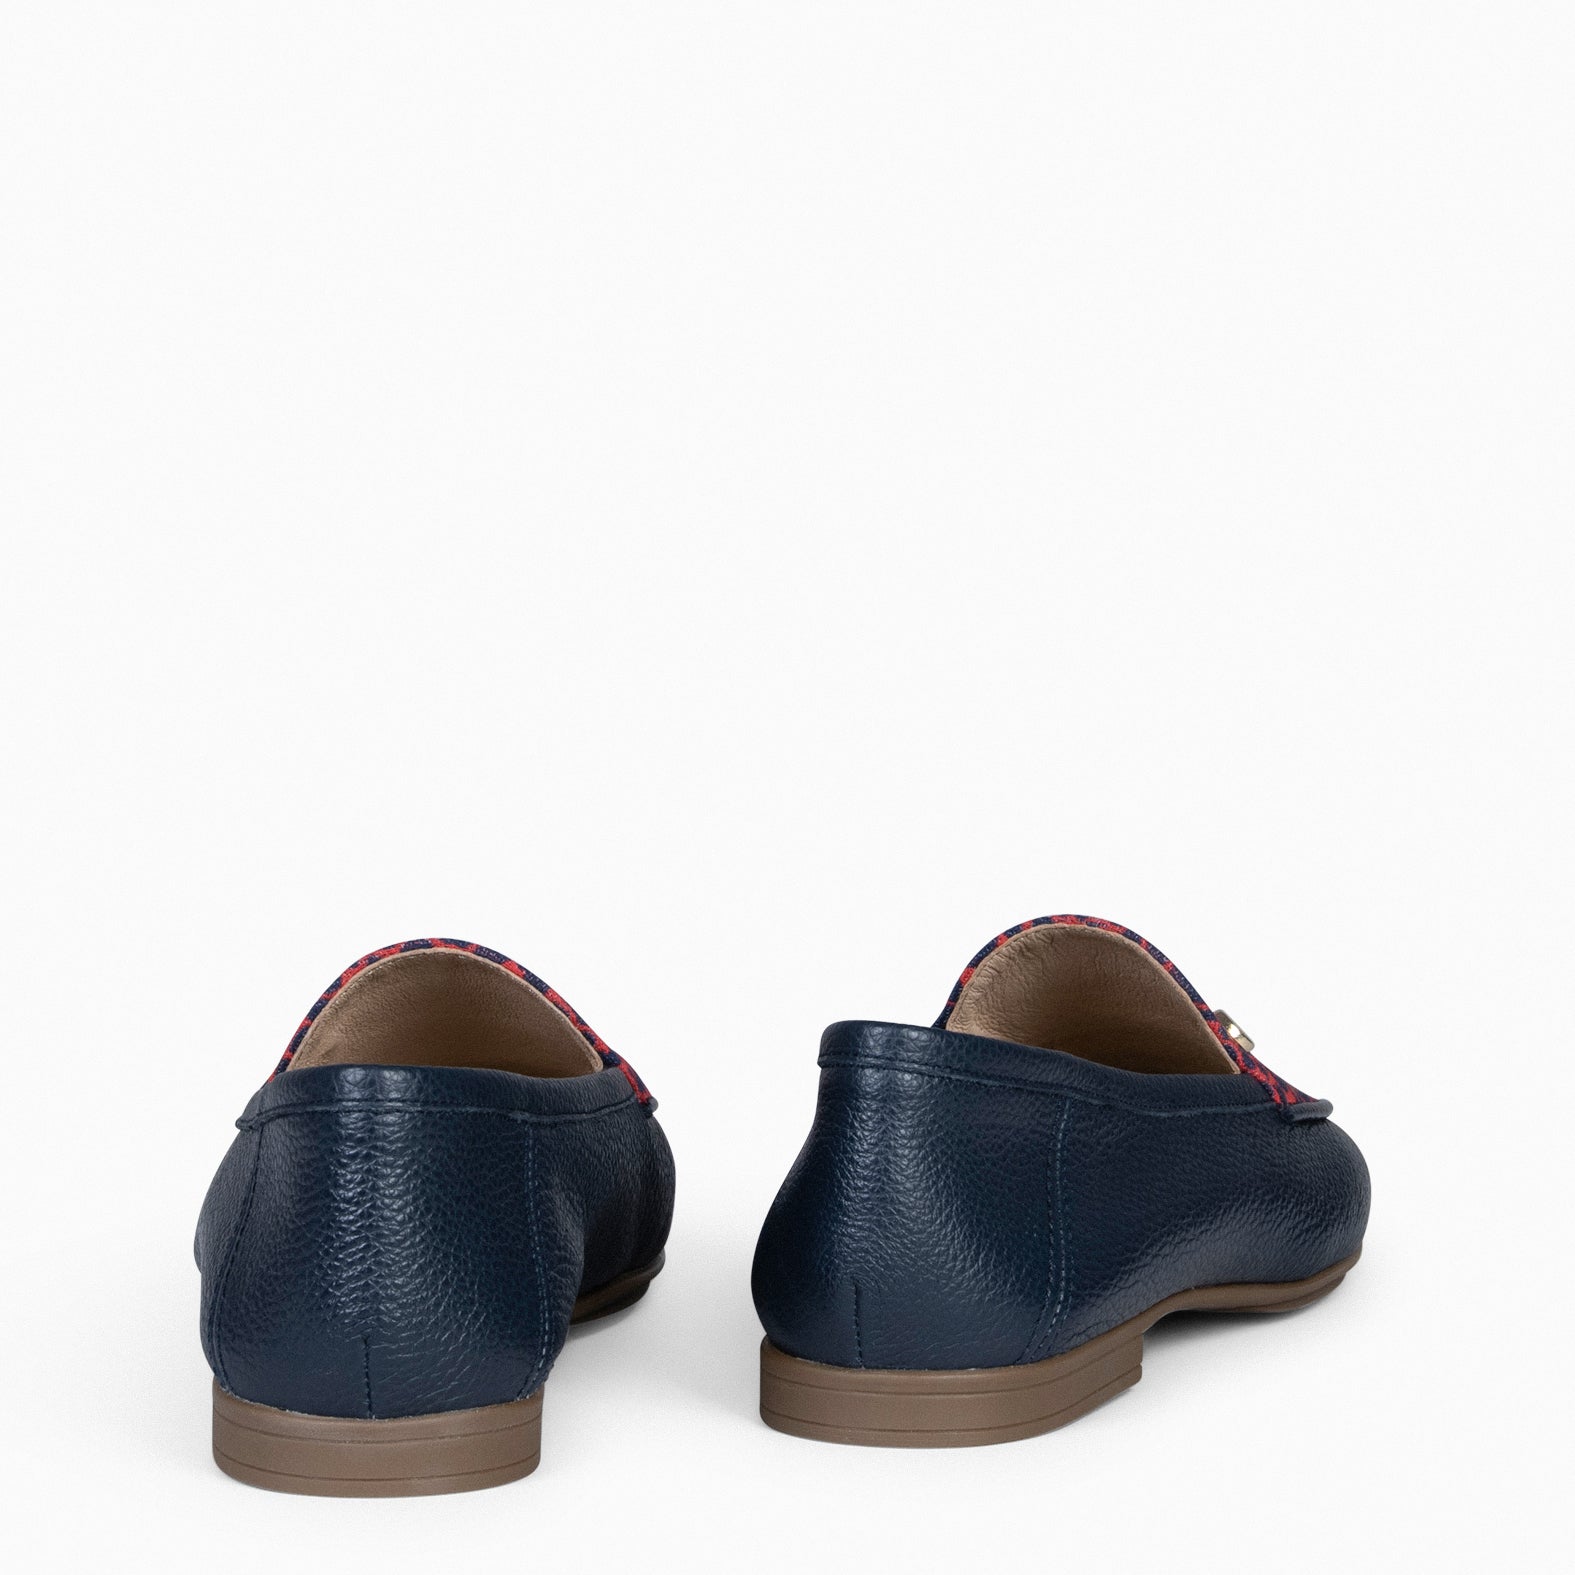 STYLE SAUVAGE – NAVY Low heeled moccasins 